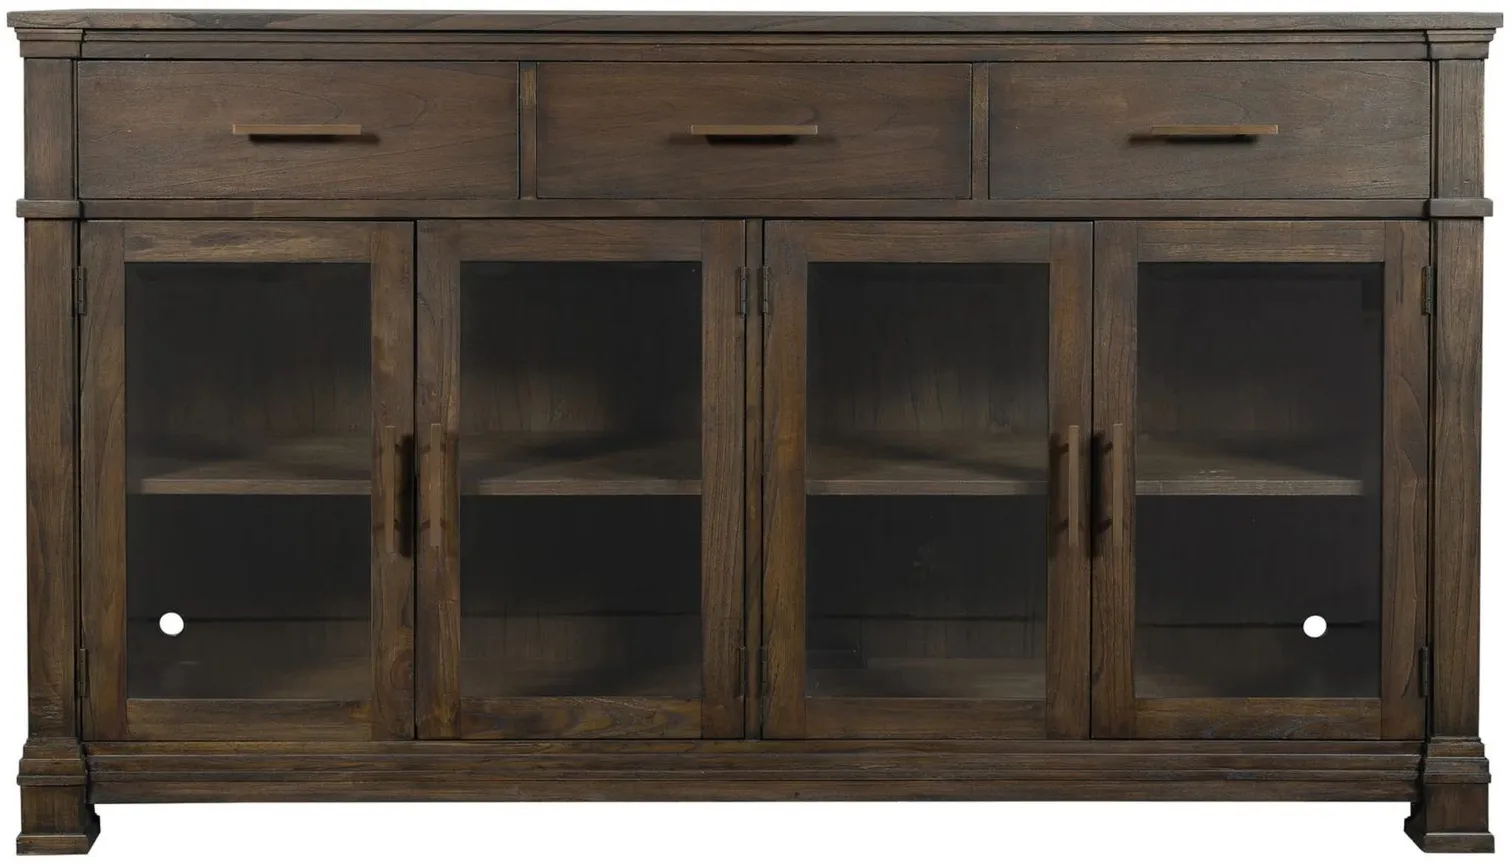 Lin Wood Entertainment Console in LINWOOD by Hekman Furniture Company